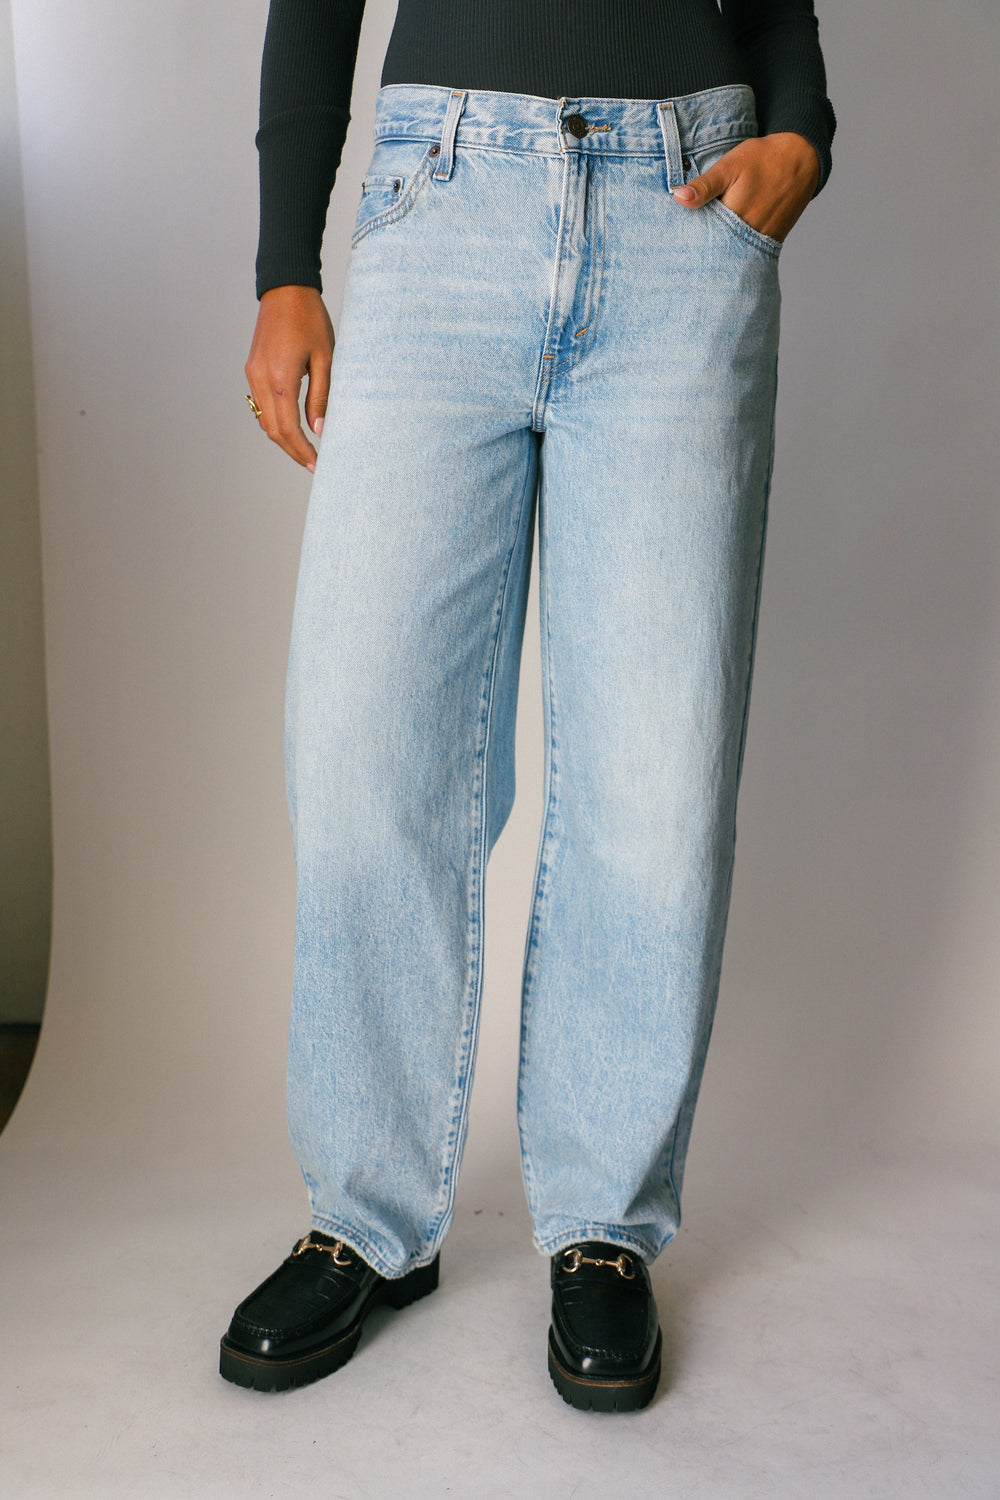 Levi's® Baggy Dad Jeans in The Middle with Damage 25 30 at